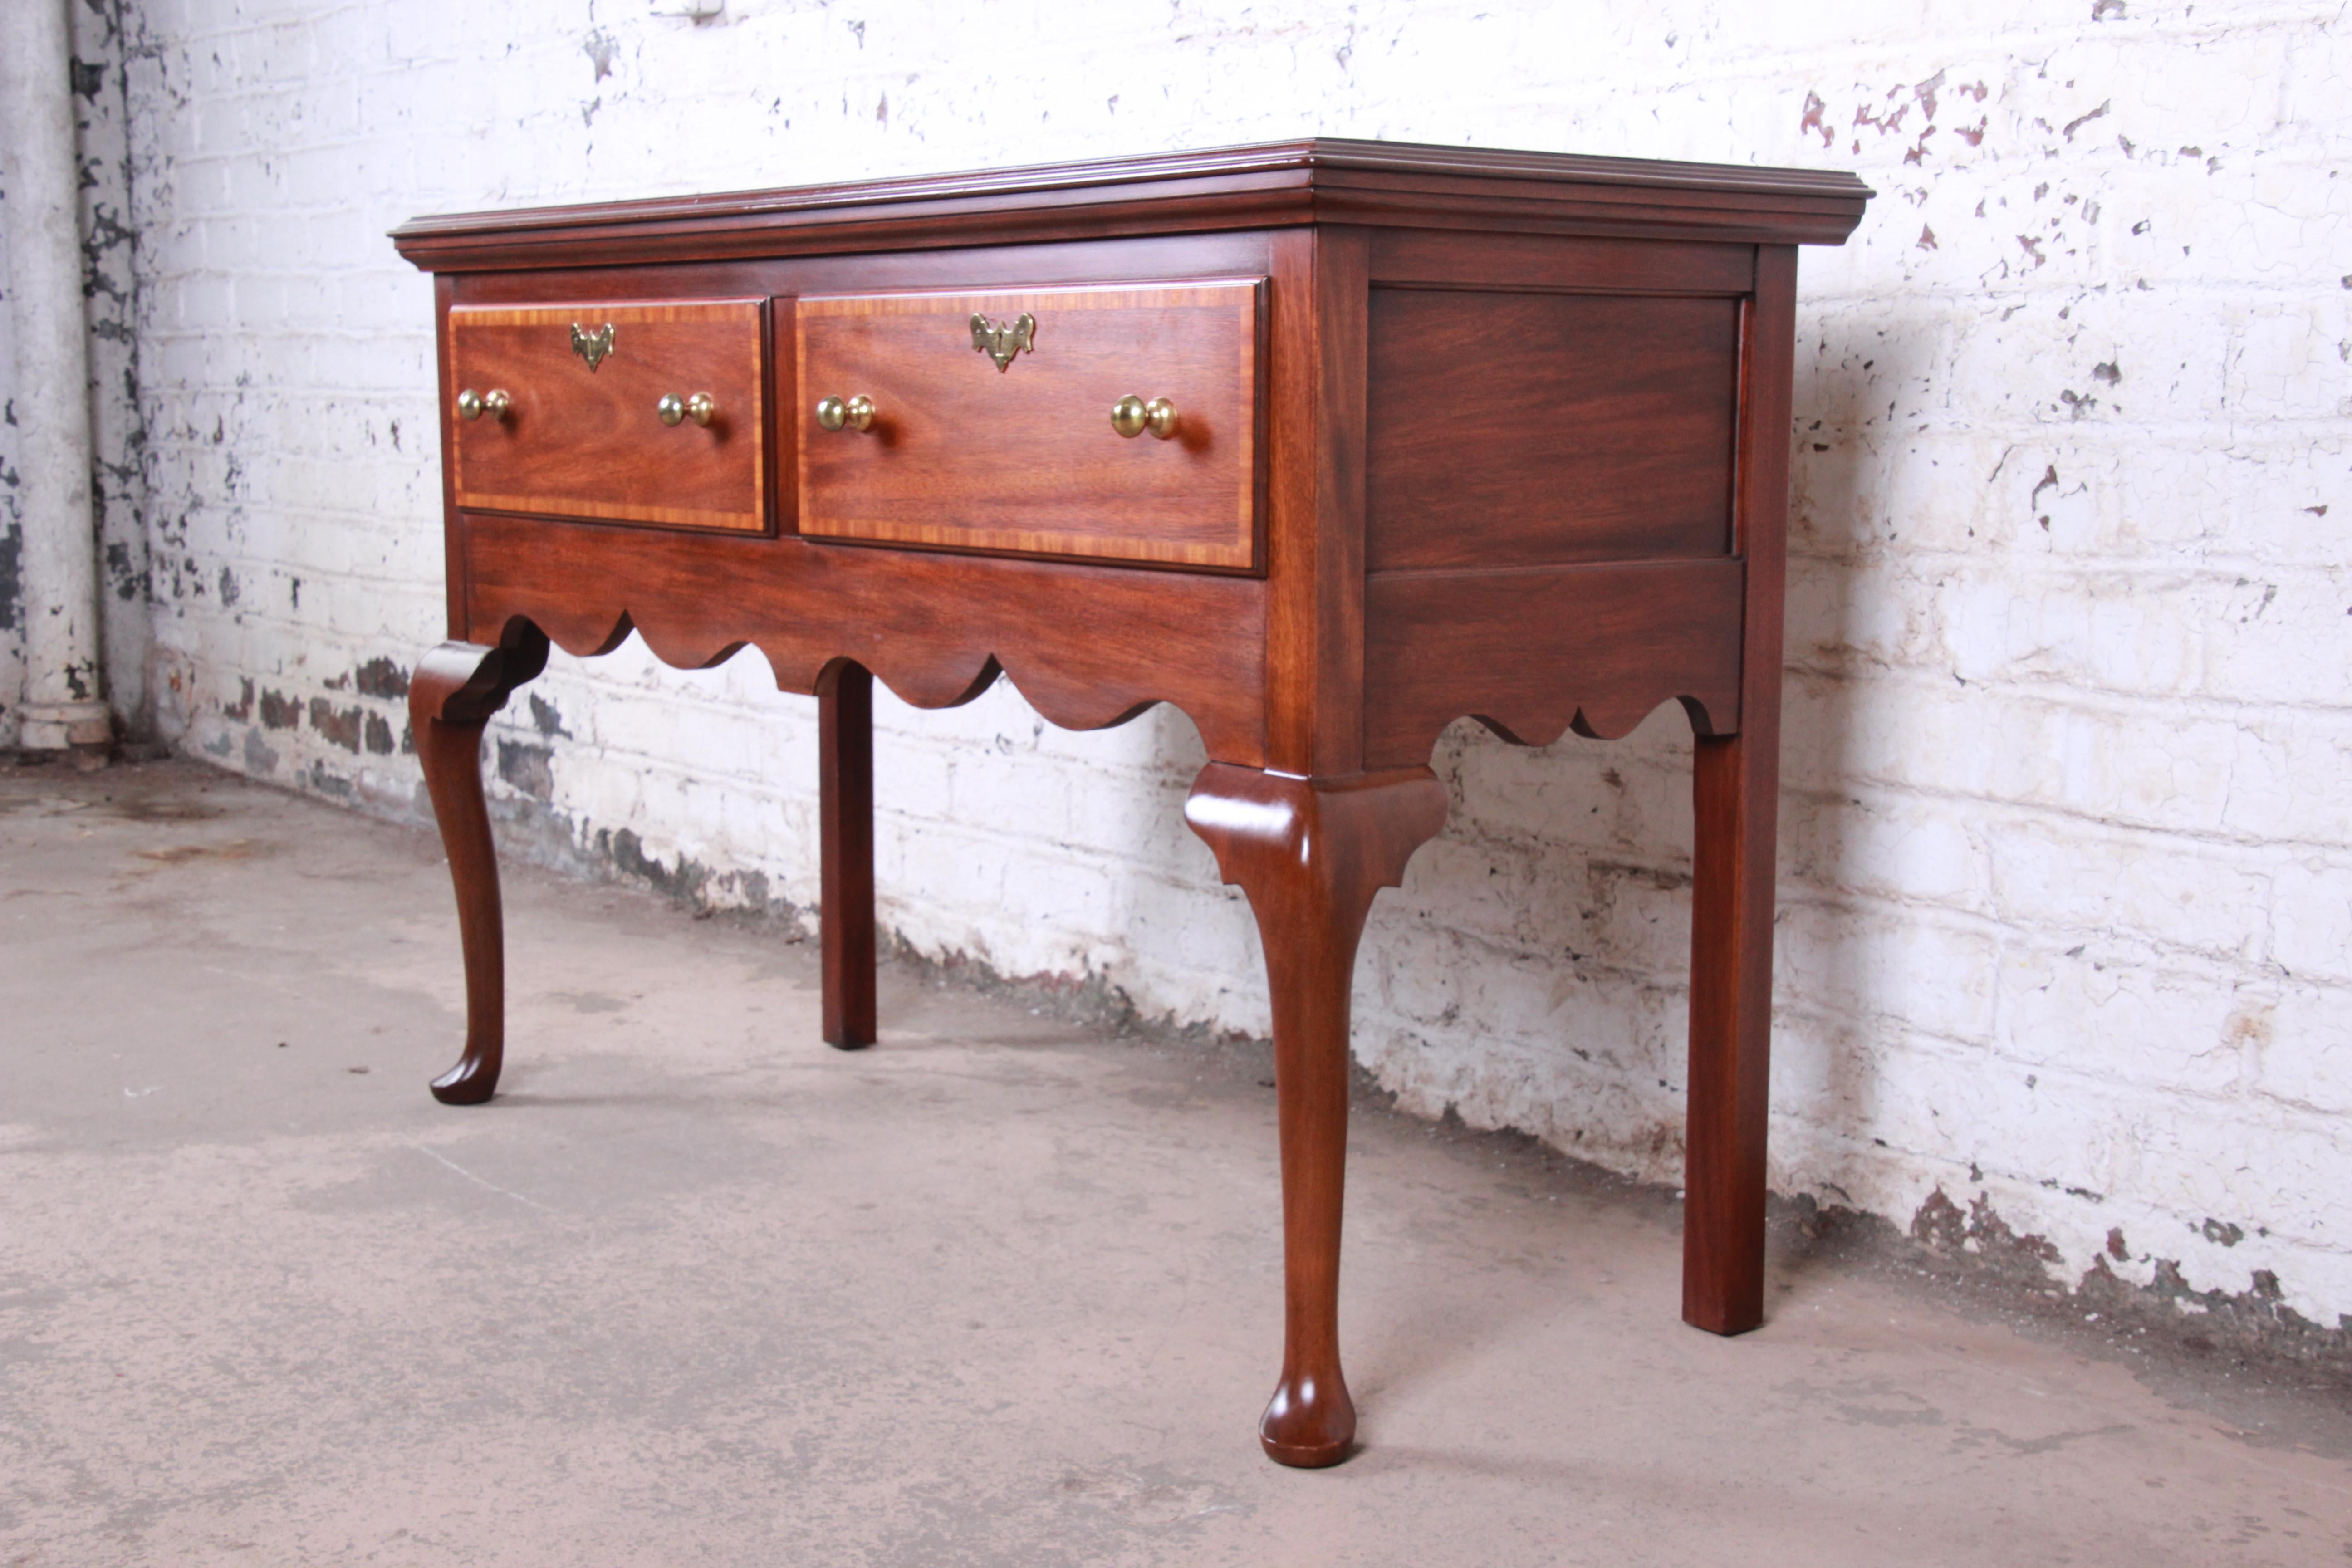 An exceptional Queen Anne style sideboard or buffet server

From the Jamestown Colony collection by Henkel Harris

USA, circa 1980s

Mahogany, with original brass hardware. Both drawers lock, and two original keys are included.

Measures: